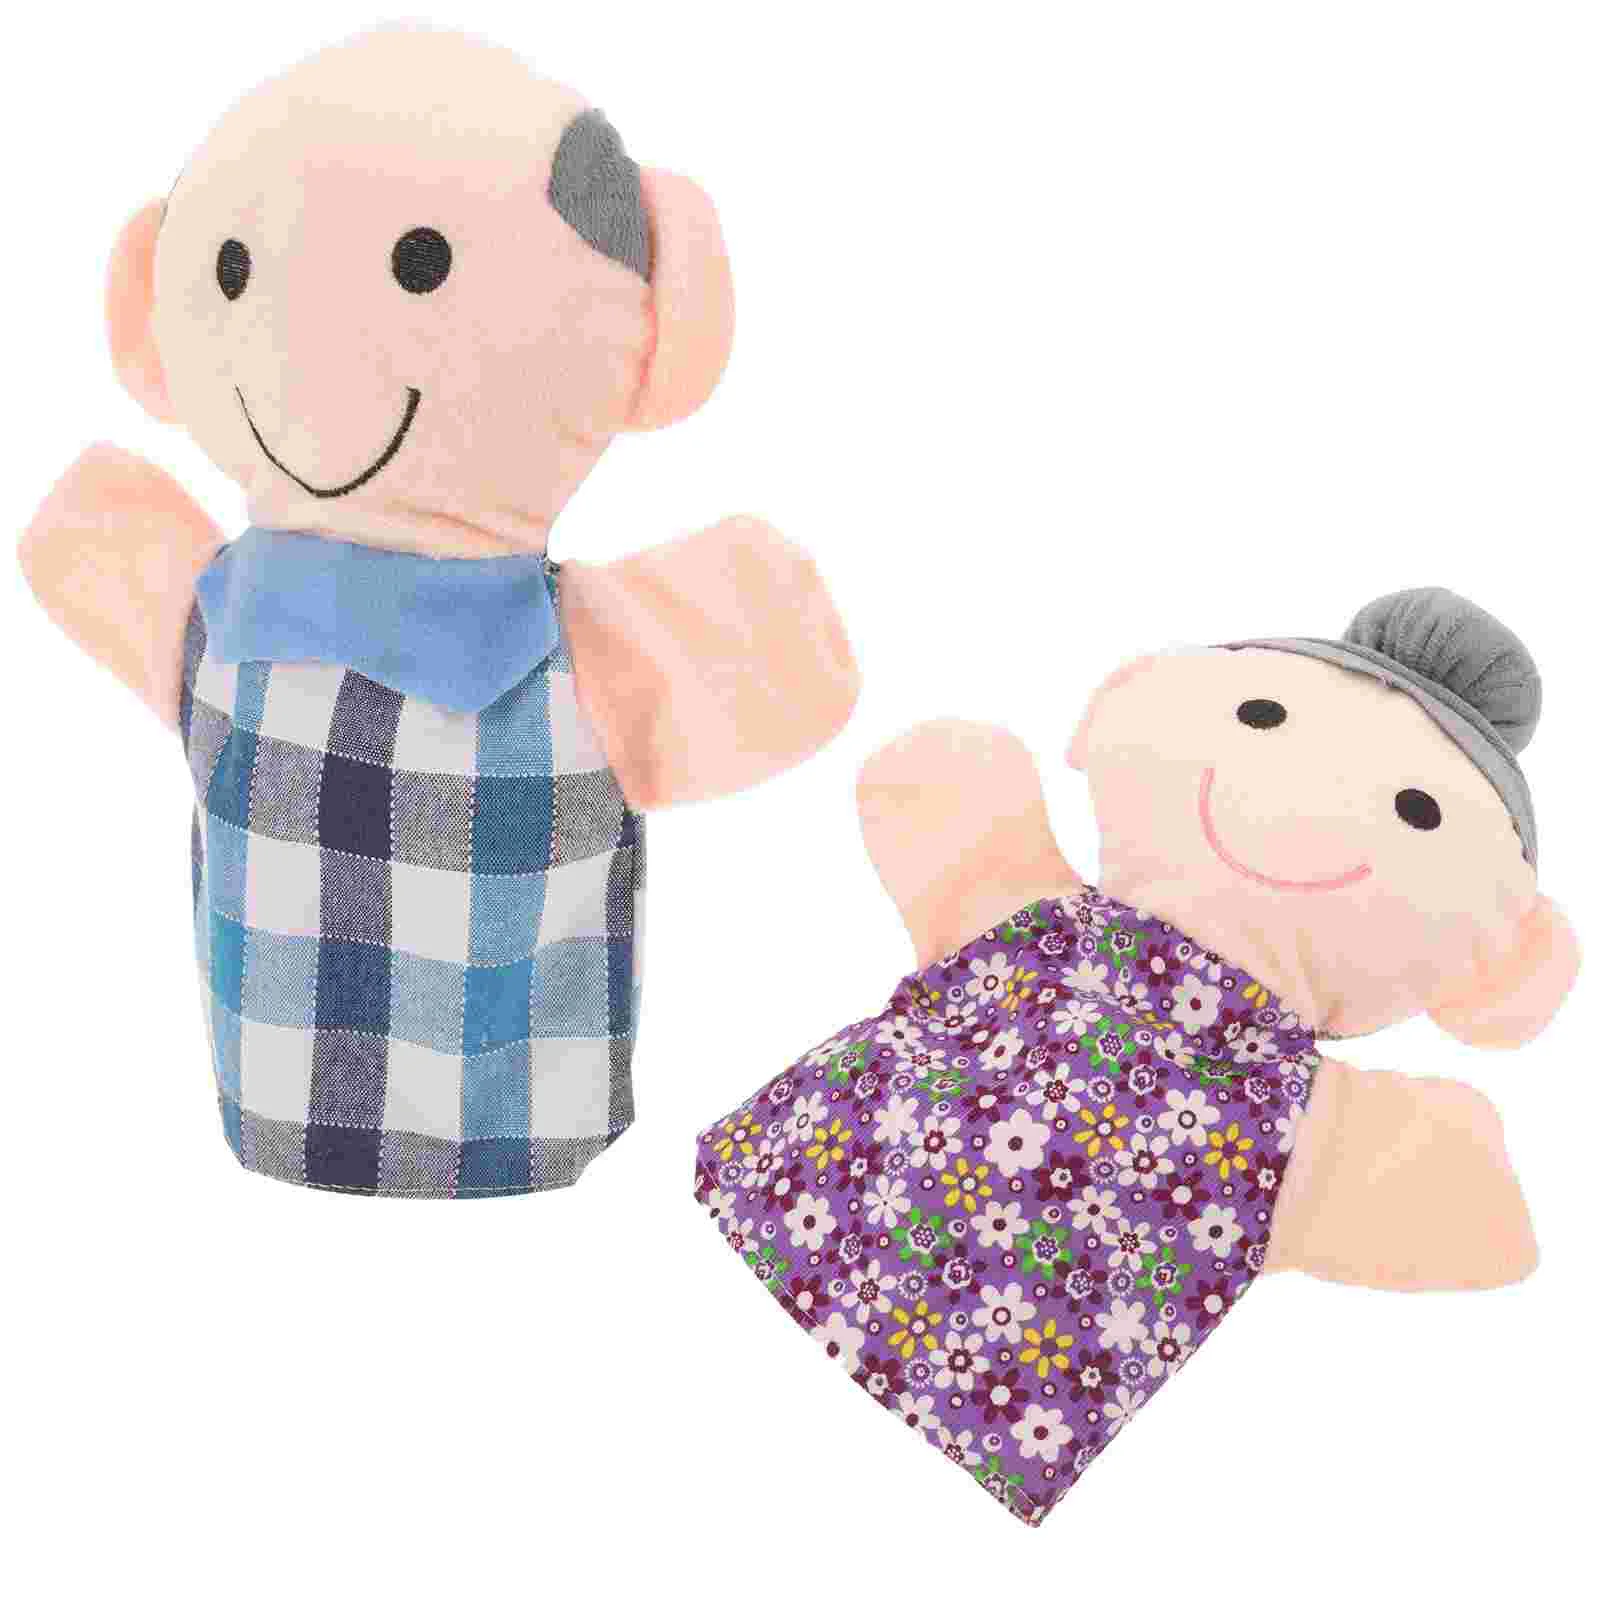 2pcs Family Members Puppets Adorable Cloth Hand Puppets for Teaching Role Play (Grandfather, Grandmother) dropshipping 6pcs baby kid plush cloth play game learn story family finger puppets toys